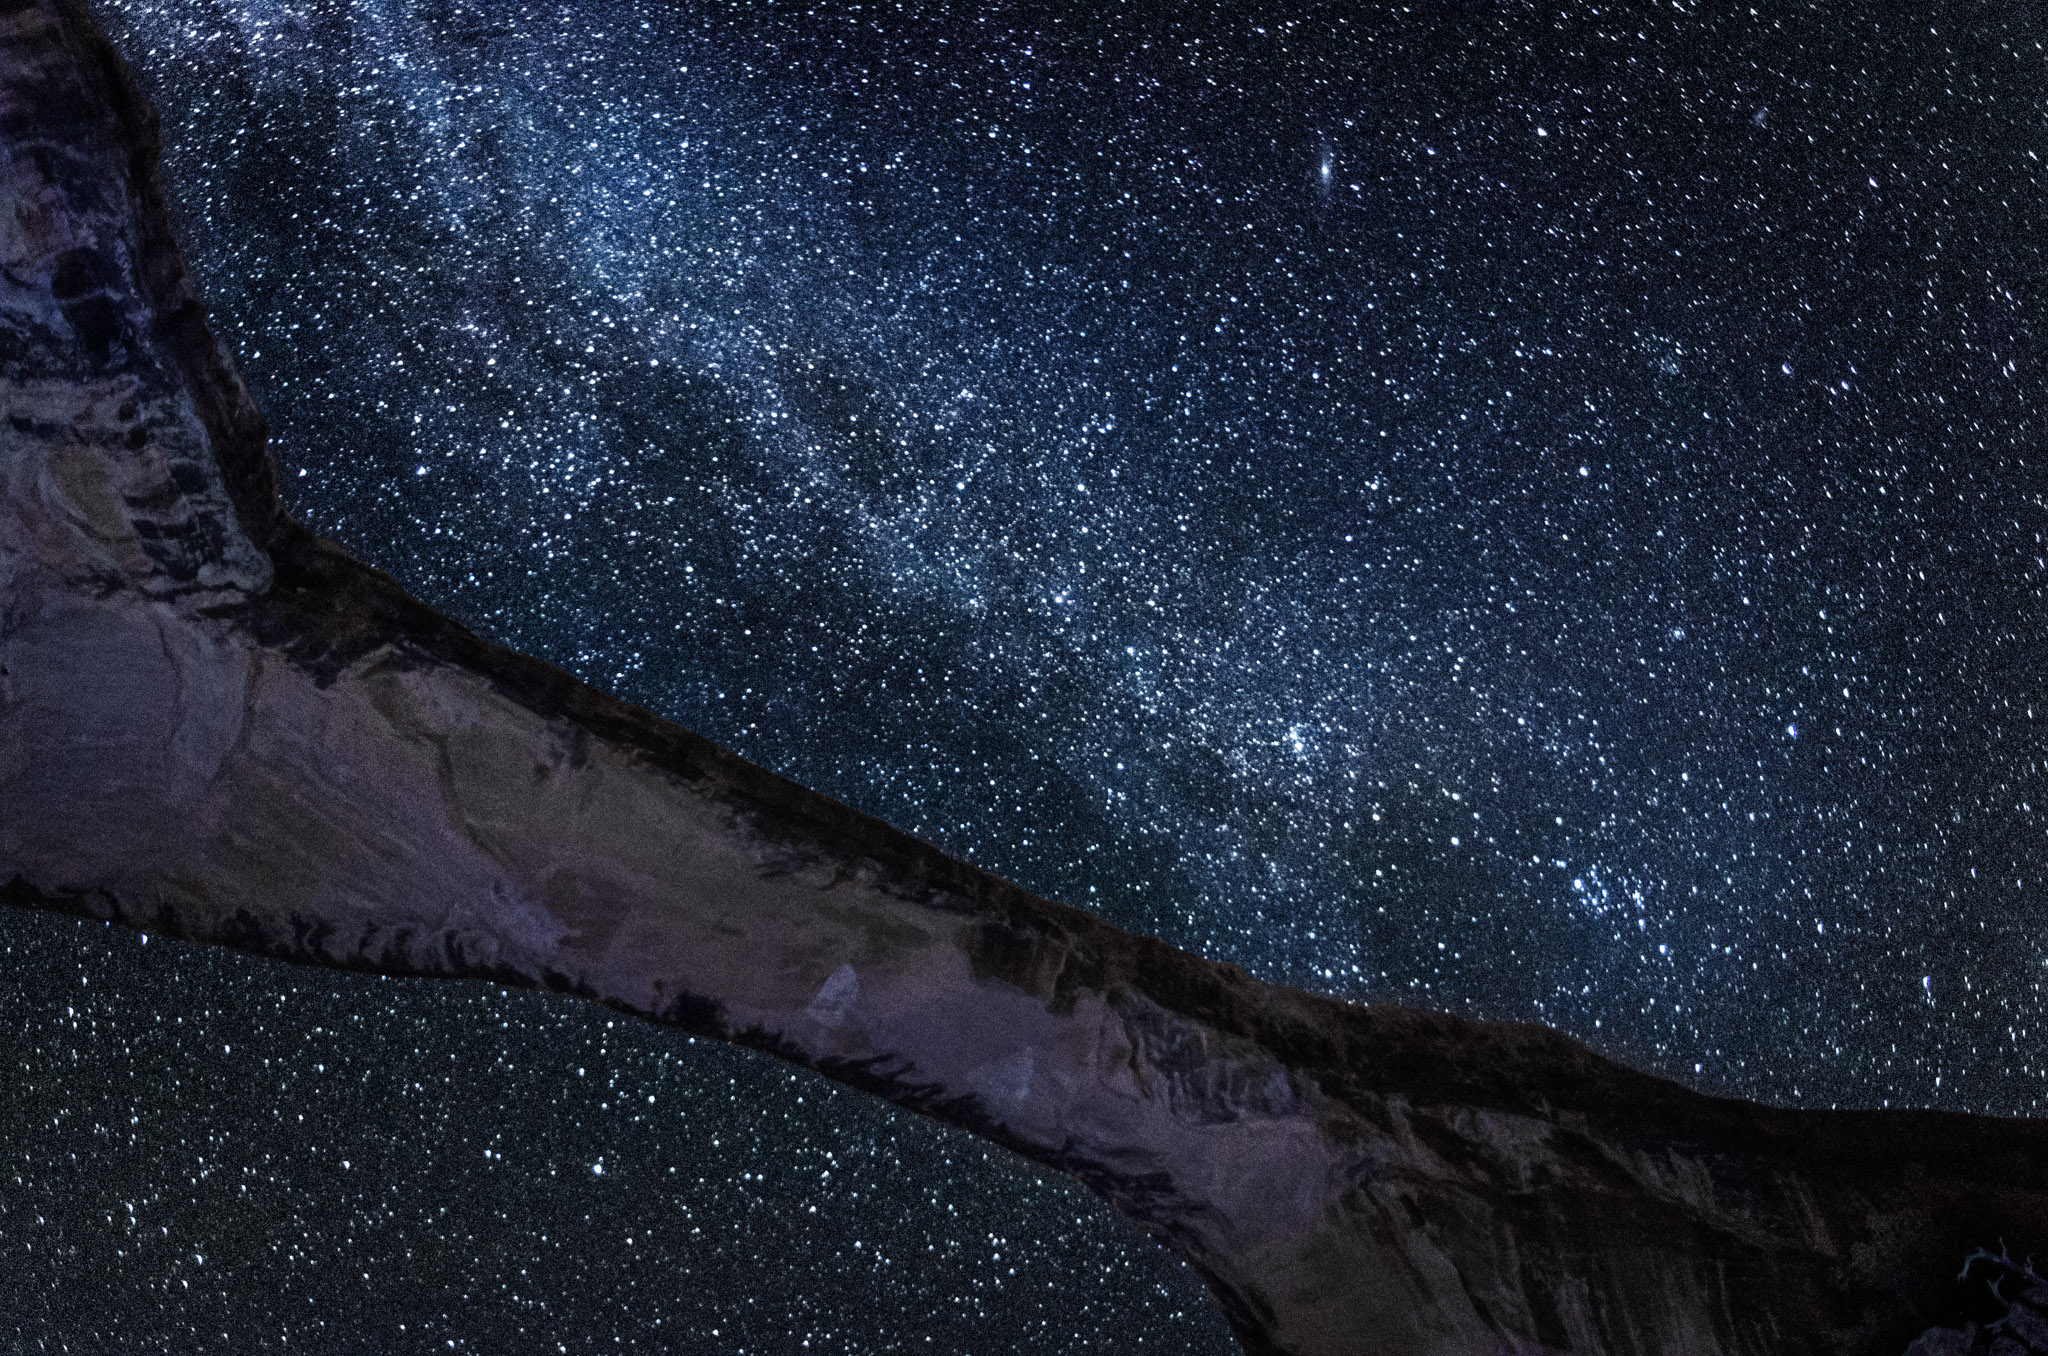 Star photography in Natural Bridges - Another Angle